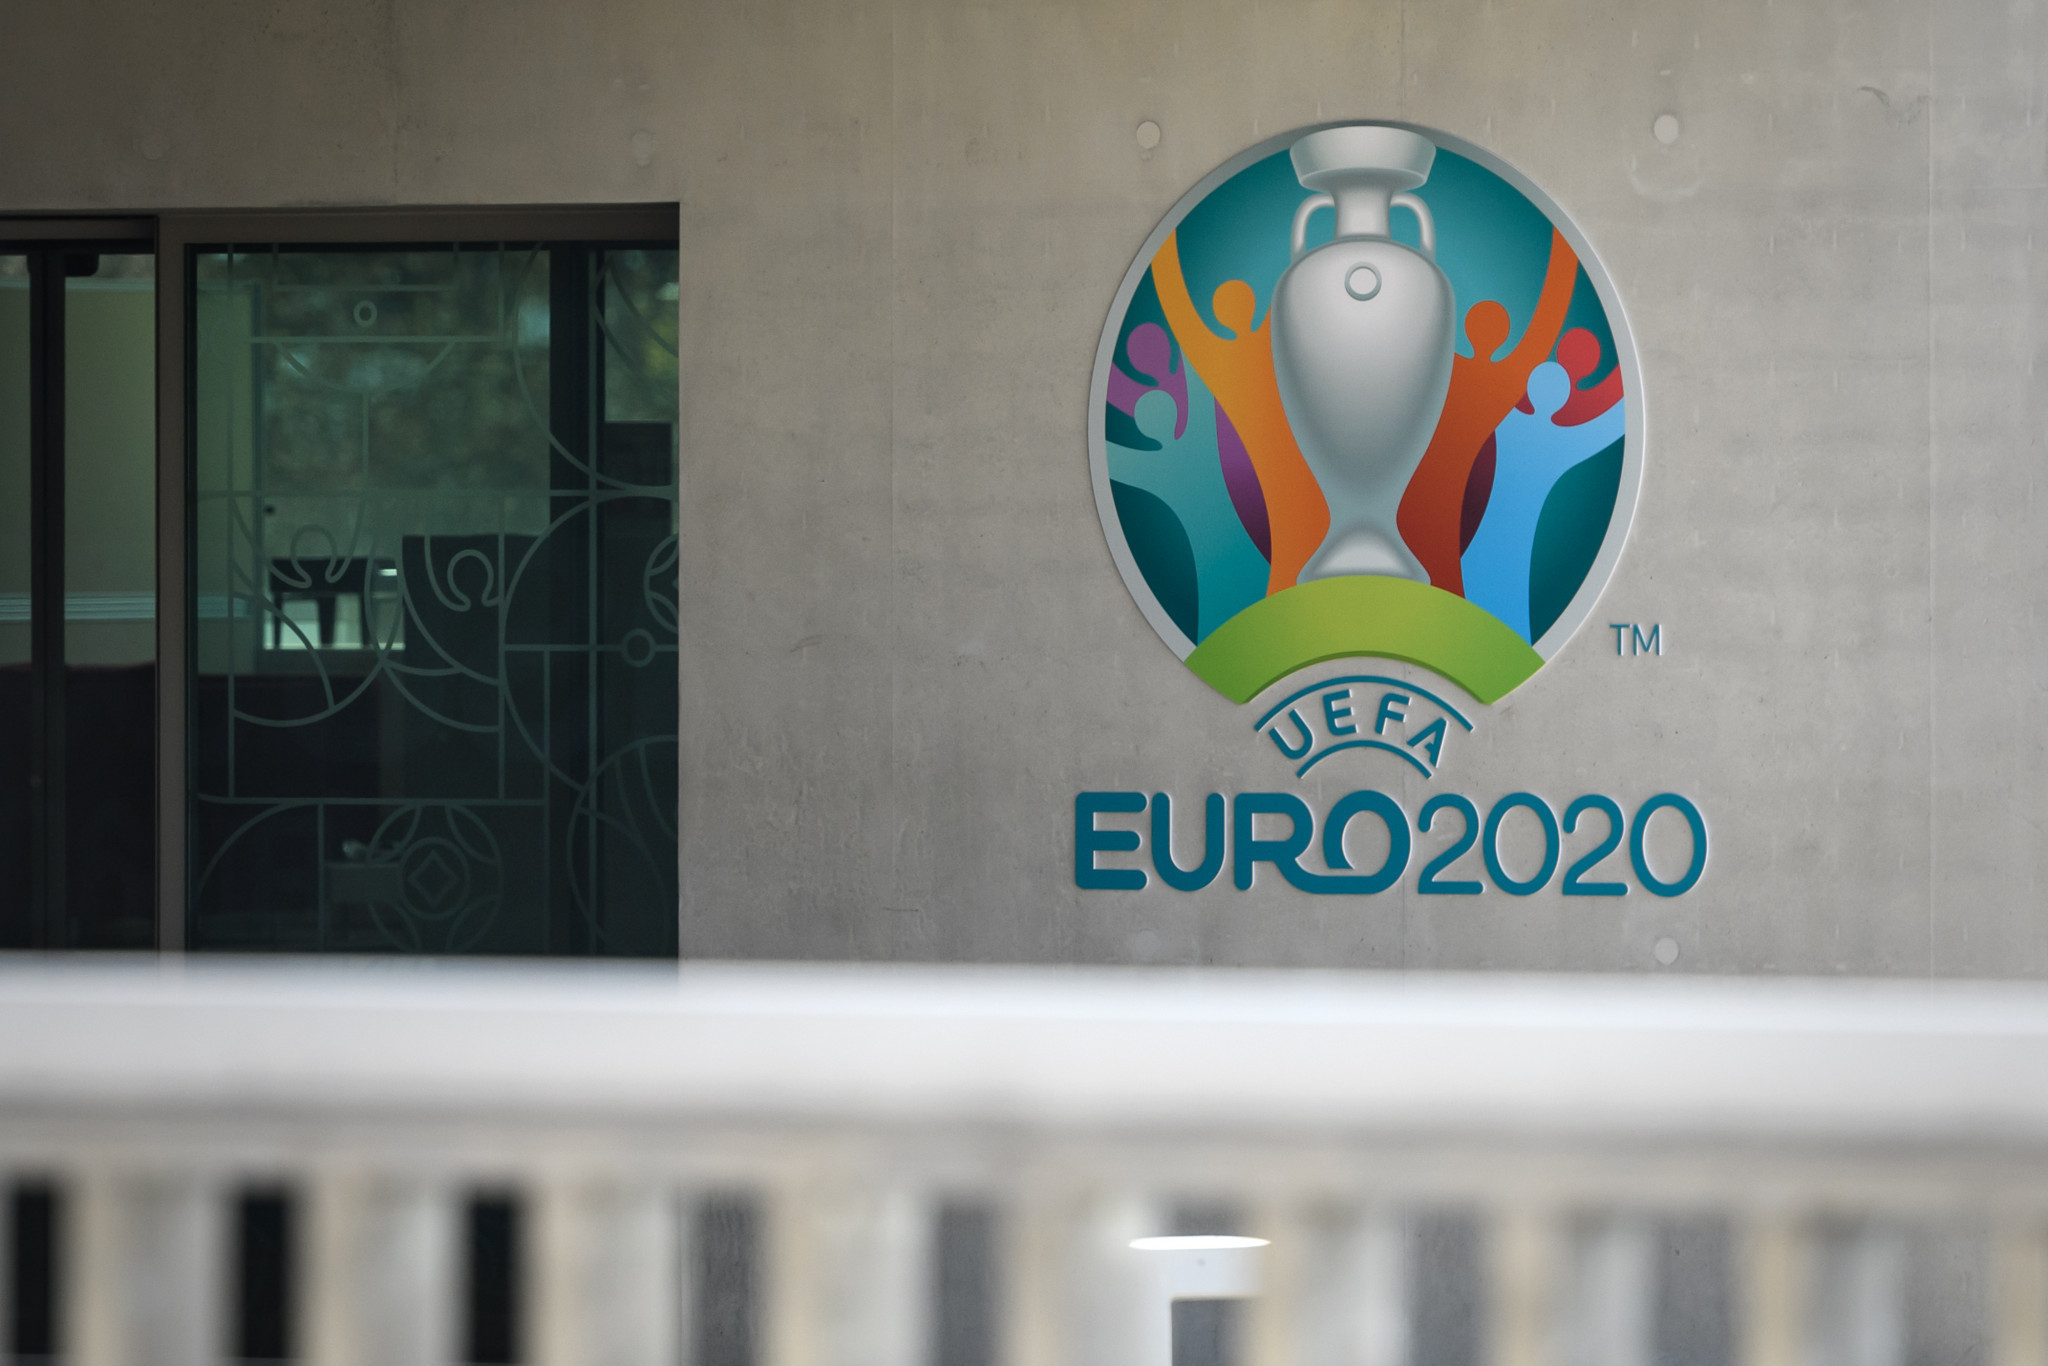 Coronavirus expert Daniel Koch has been appointed as medical adviser to UEFA's Euro 2020 competition ©Getty Images